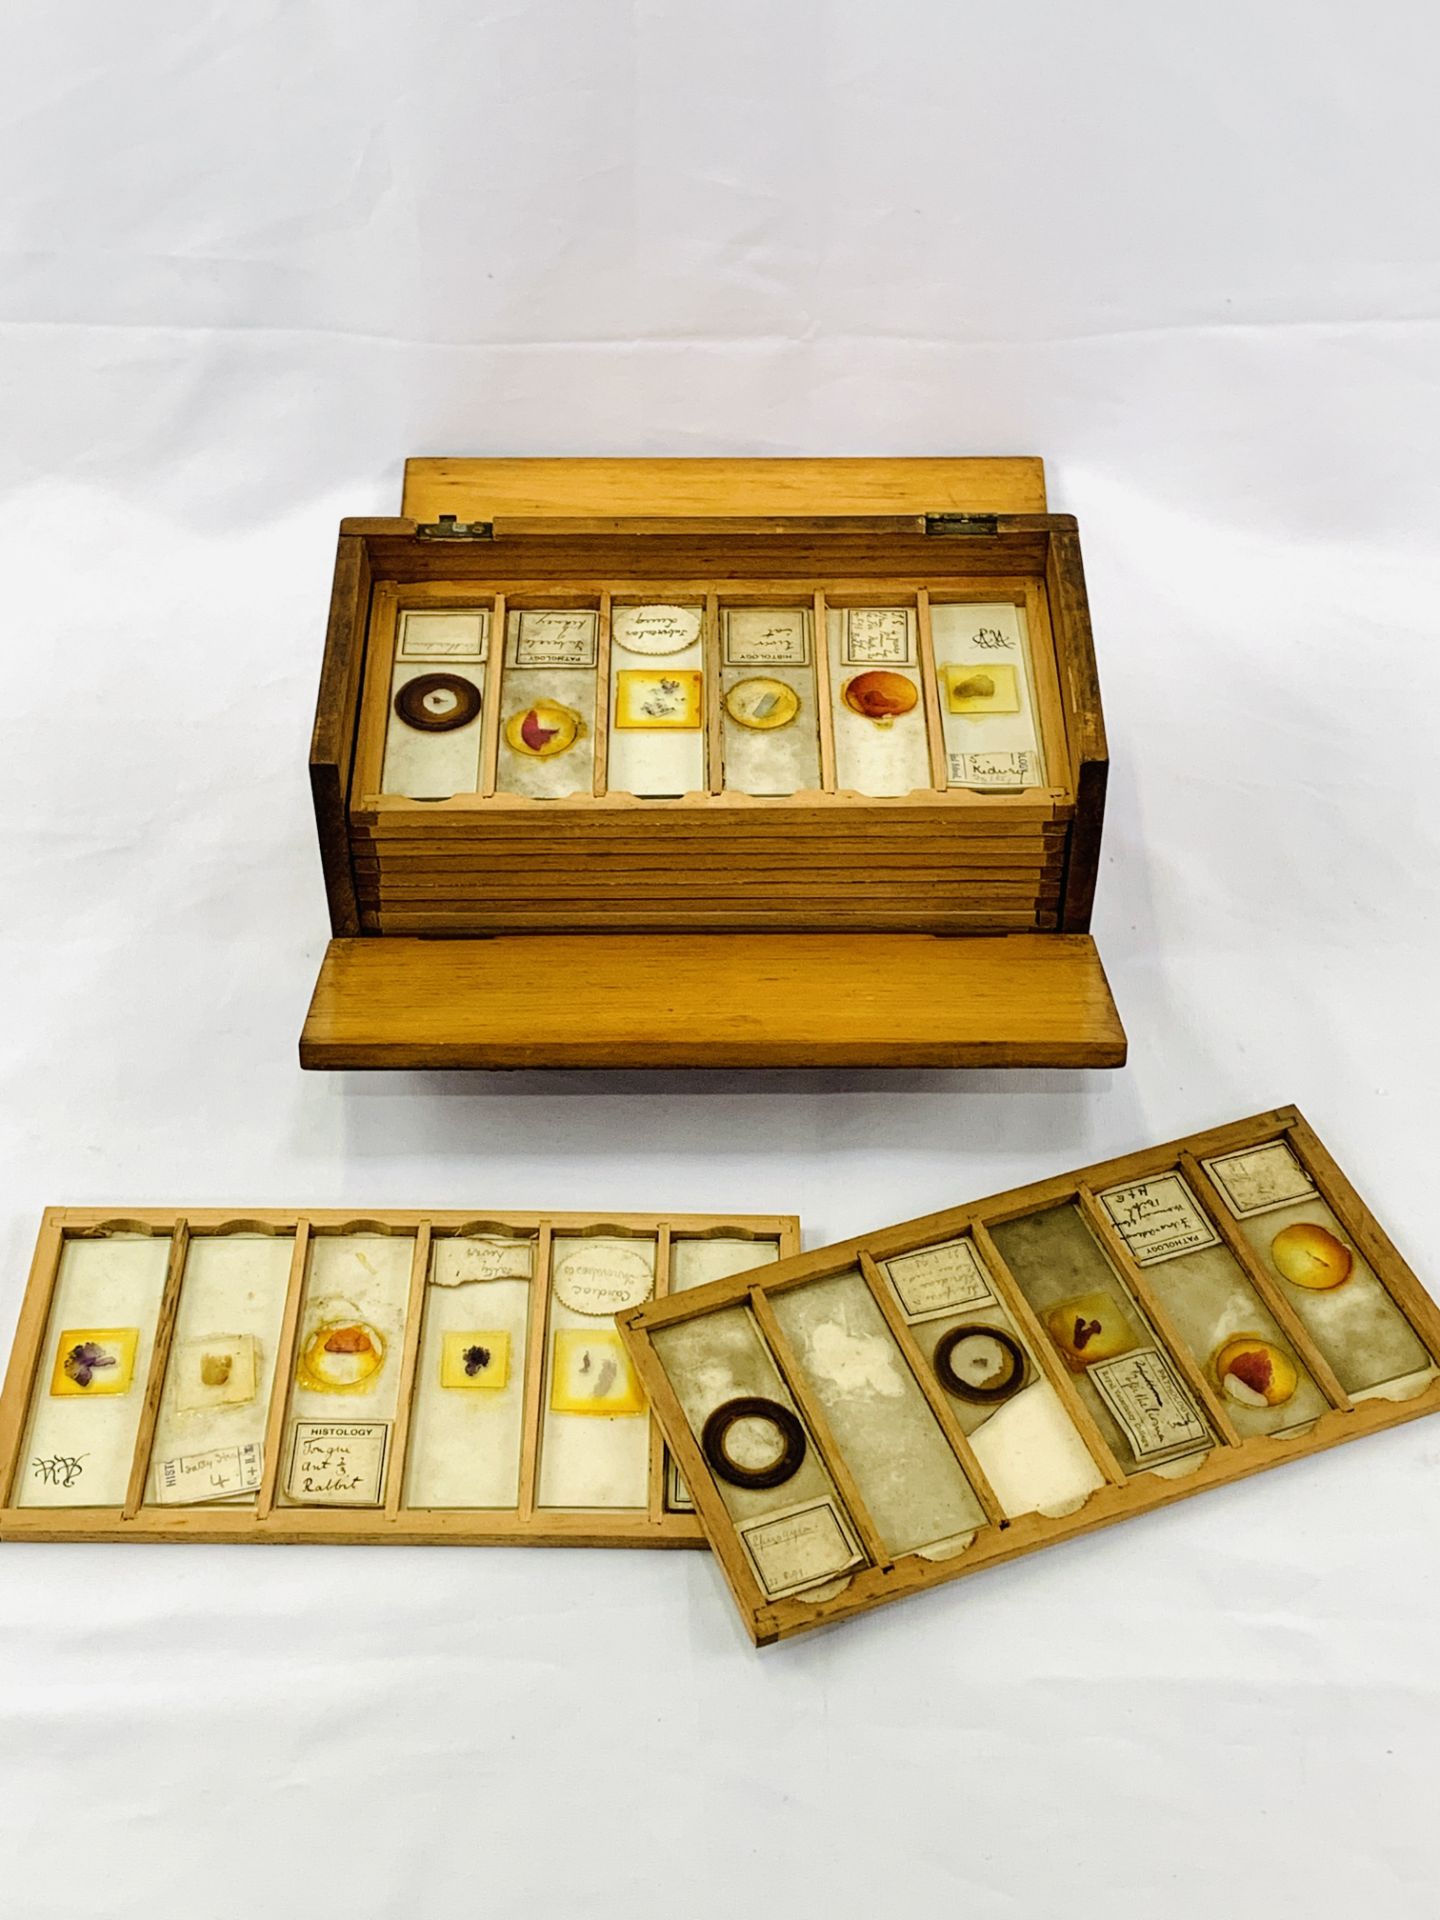 Brass microscope by John Browning, dated 1888, in fitted box and with slides - Image 7 of 11